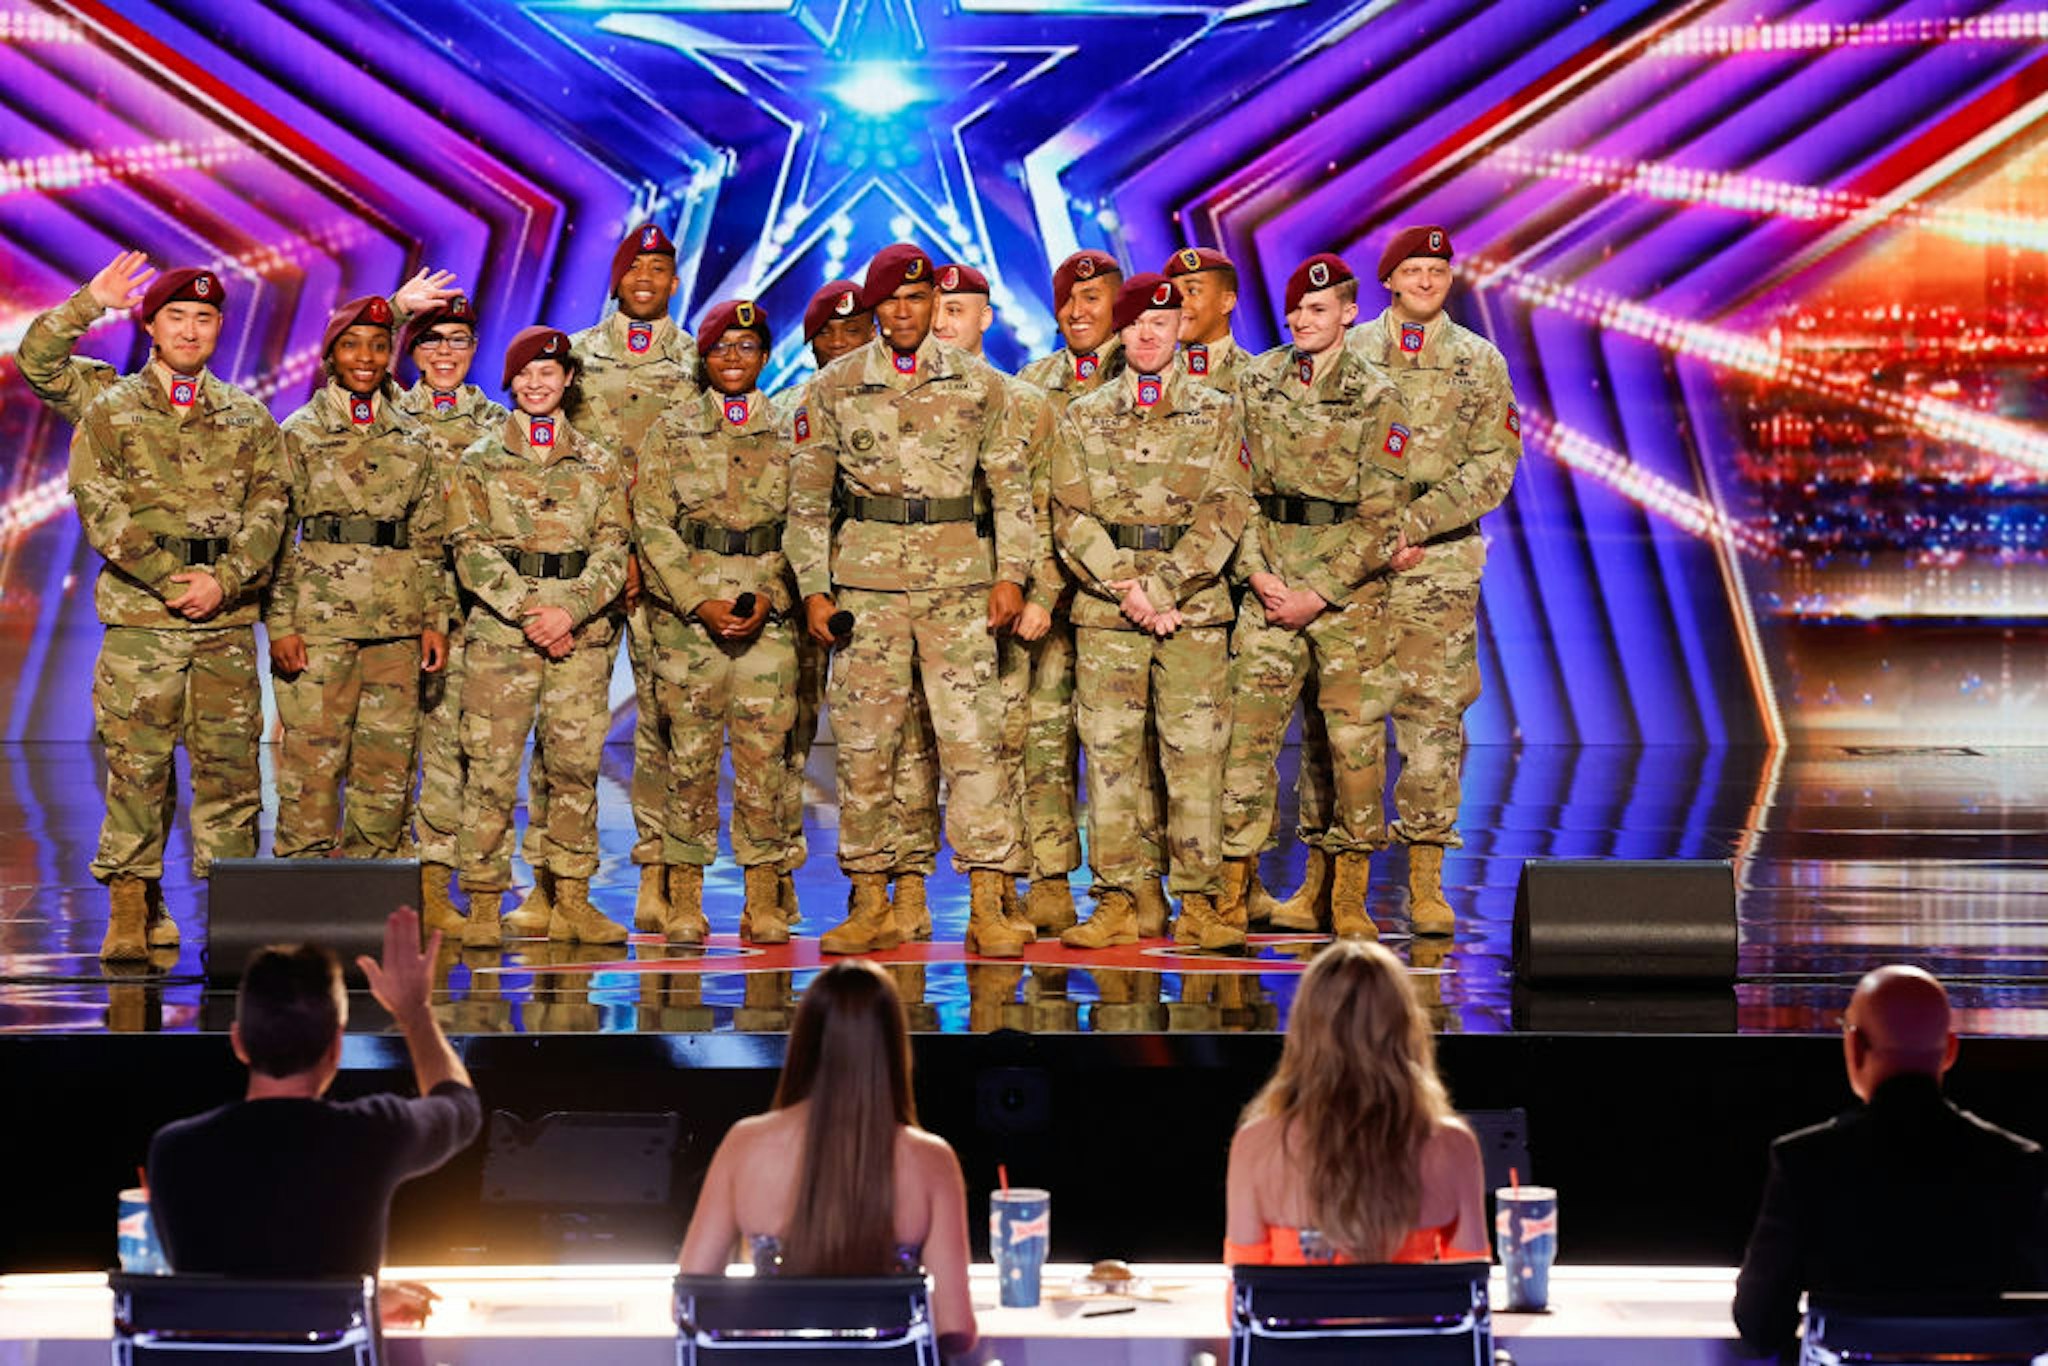 AMERICA'S GOT TALENT -- "Auditions 6" Episode 1806 -- Pictured: 82nd Airborne Chorus -- (Photo by: Trae Patton/NBC via Getty Images)